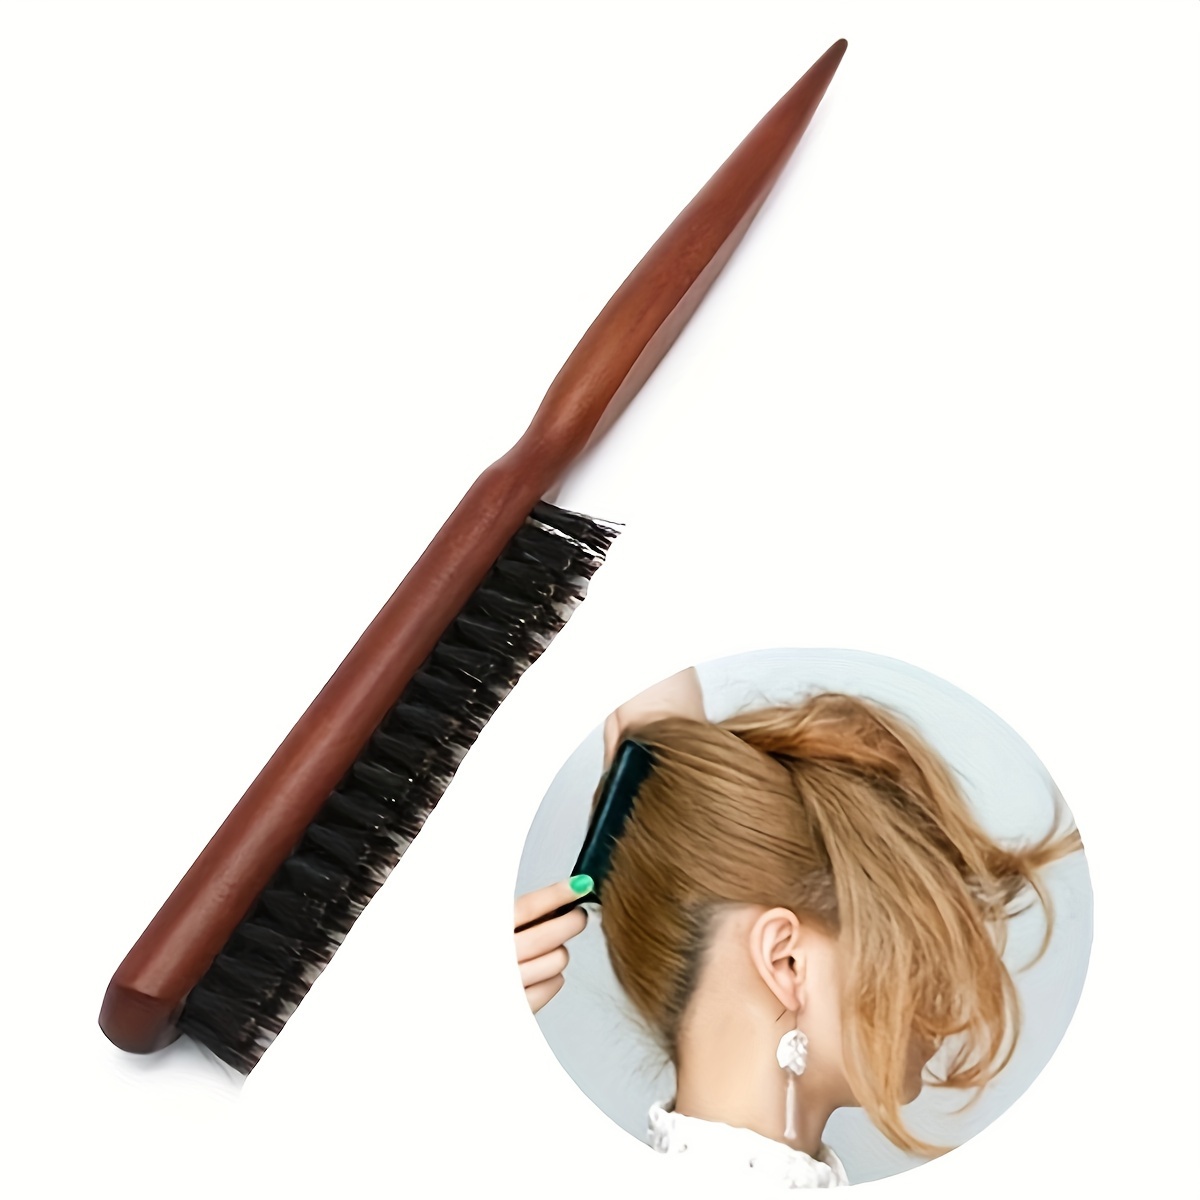 

Slim Teasing Hair Brush, Mixed Bristle Teasing Brush Rat Tail Comb For Hair Sectioning For Edge Control Backcombing Smoothing And Styling